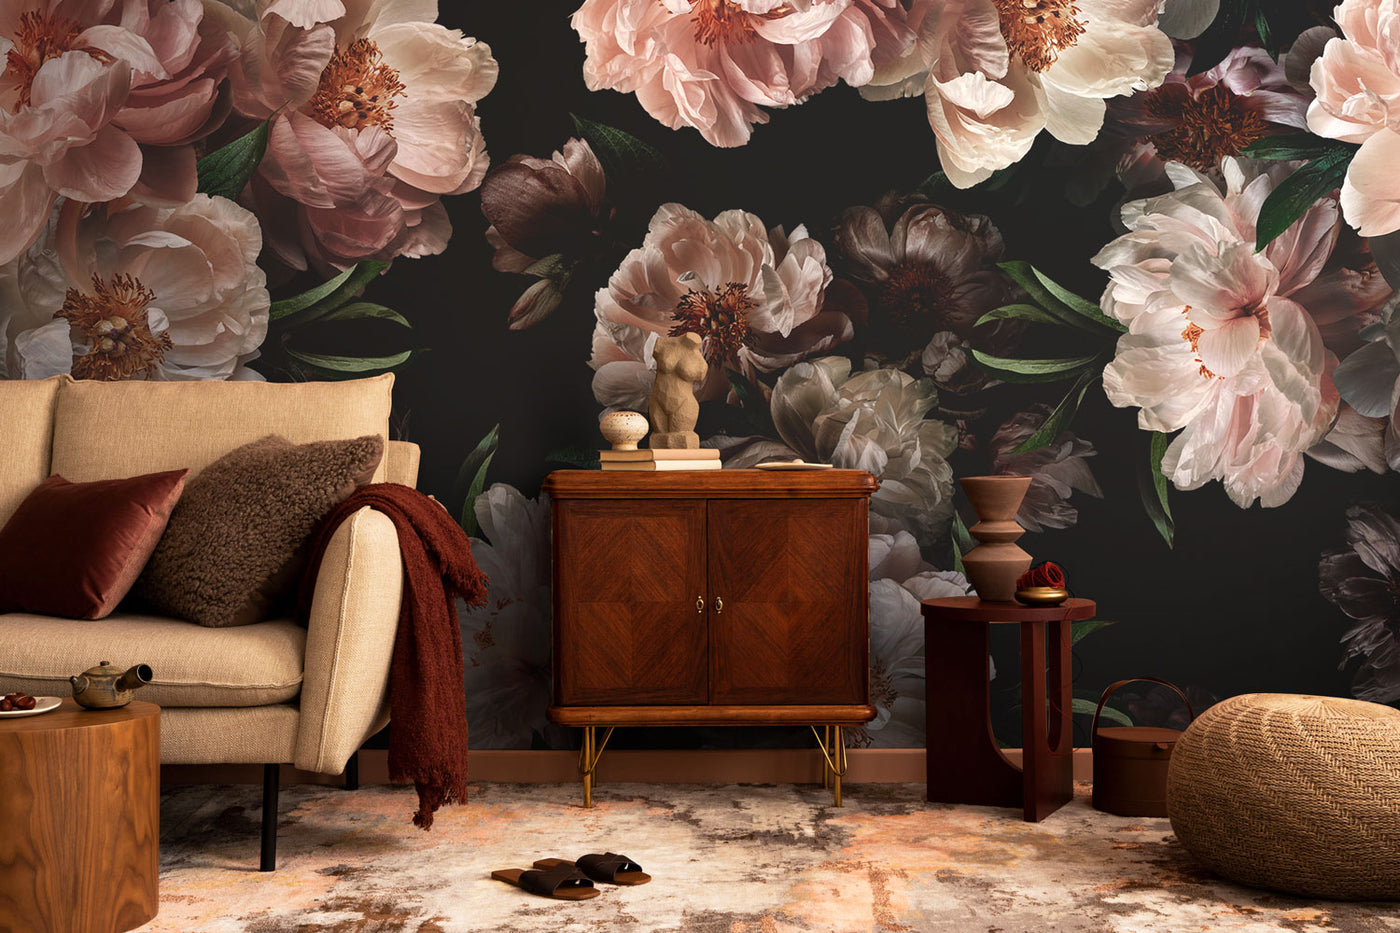 Midnight Floral 3 Wall Mural